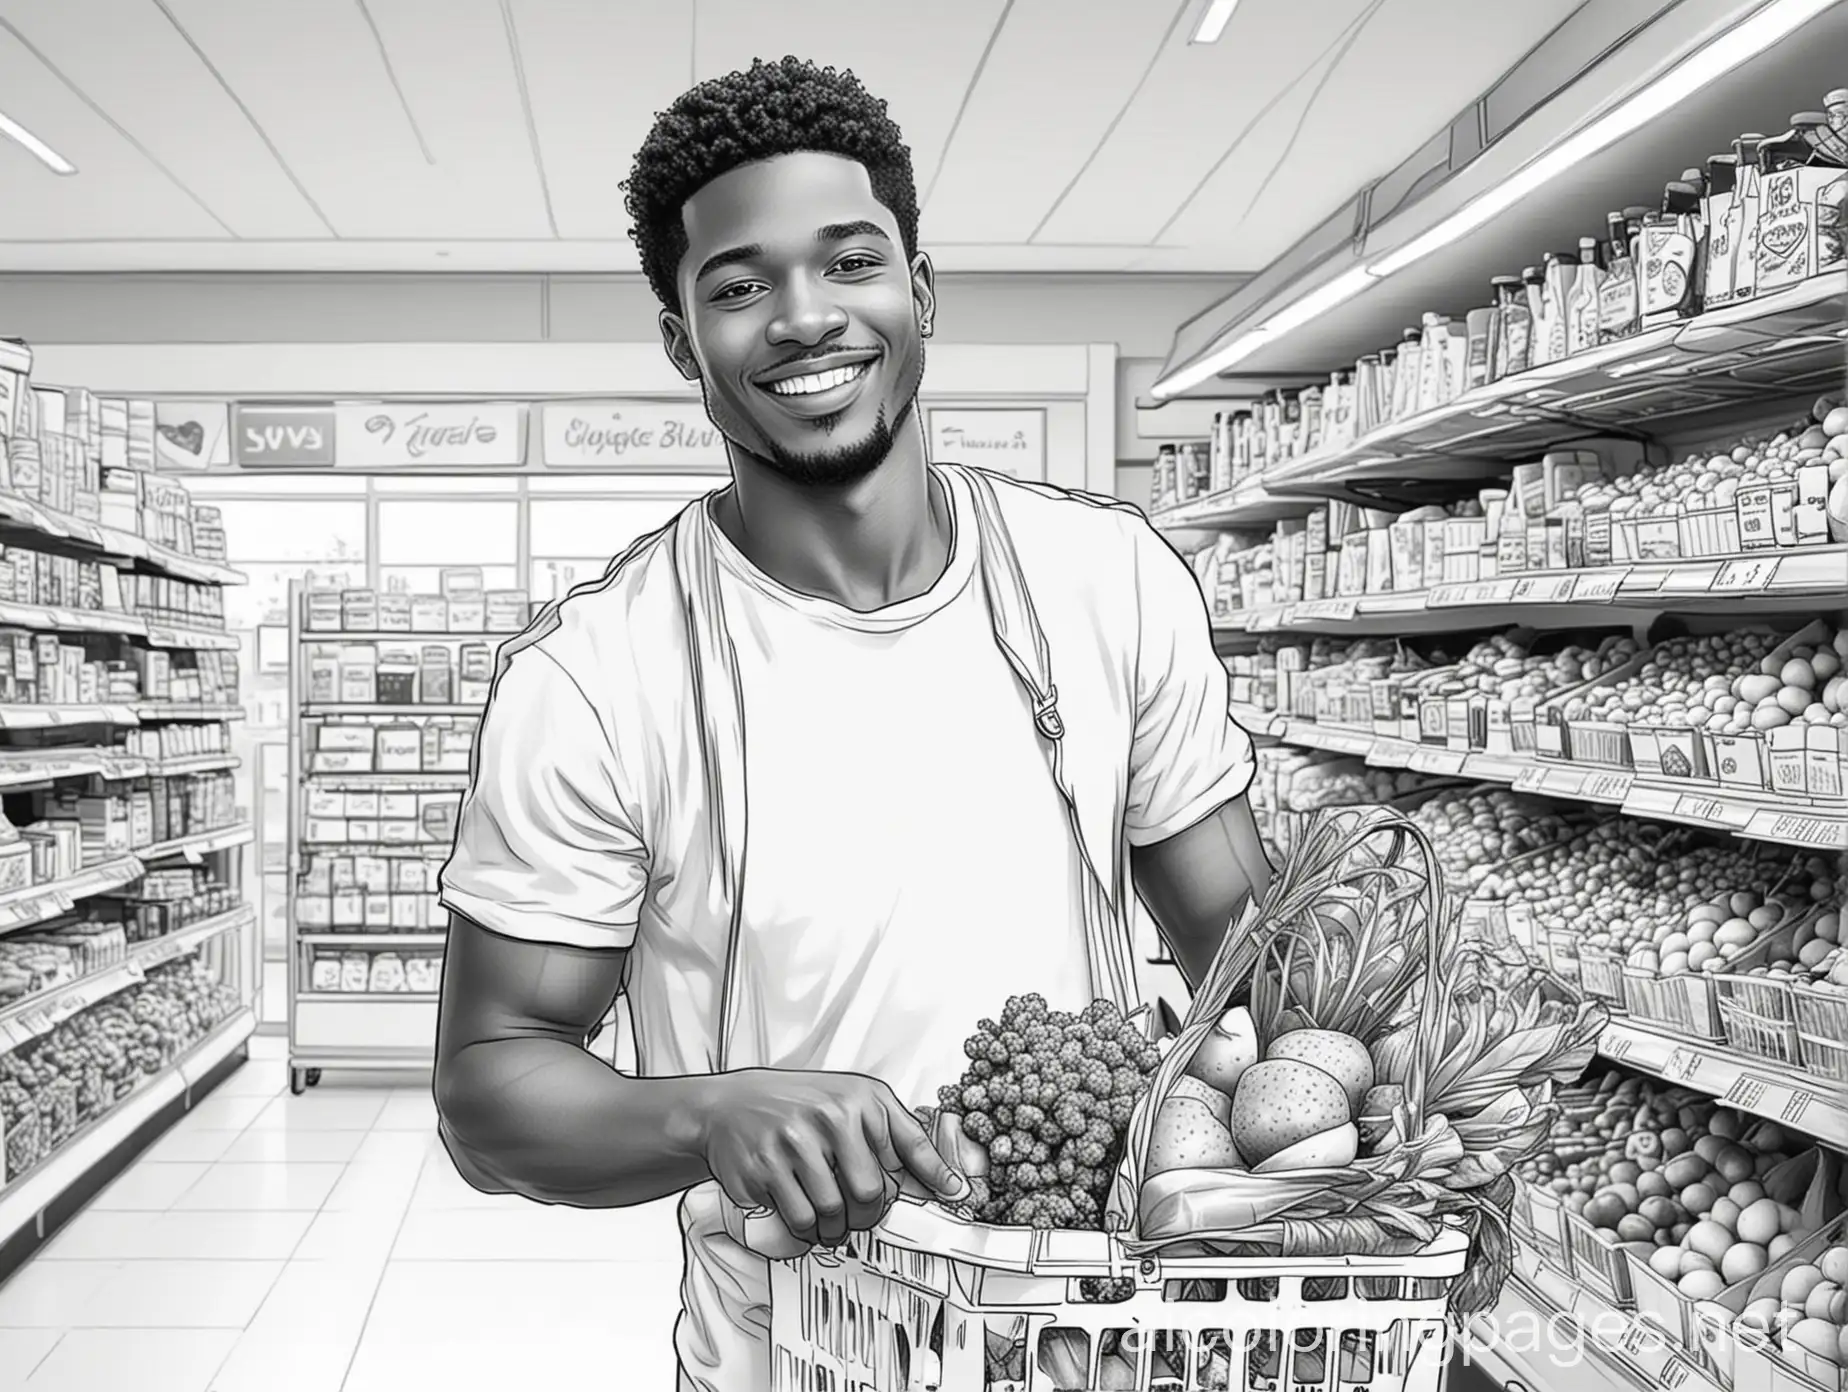 At the Supermarket: Happy Black Stylish Guy with Shopping Basket Shopping for Organic Fruits and Vegetables in the Fresh Produce Section of the Store., Coloring Page, black and white, line art, white background, Simplicity, Ample White Space. The background of the coloring page is plain white to make it easy for young children to color within the lines. The outlines of all the subjects are easy to distinguish, making it simple for kids to color without too much difficulty